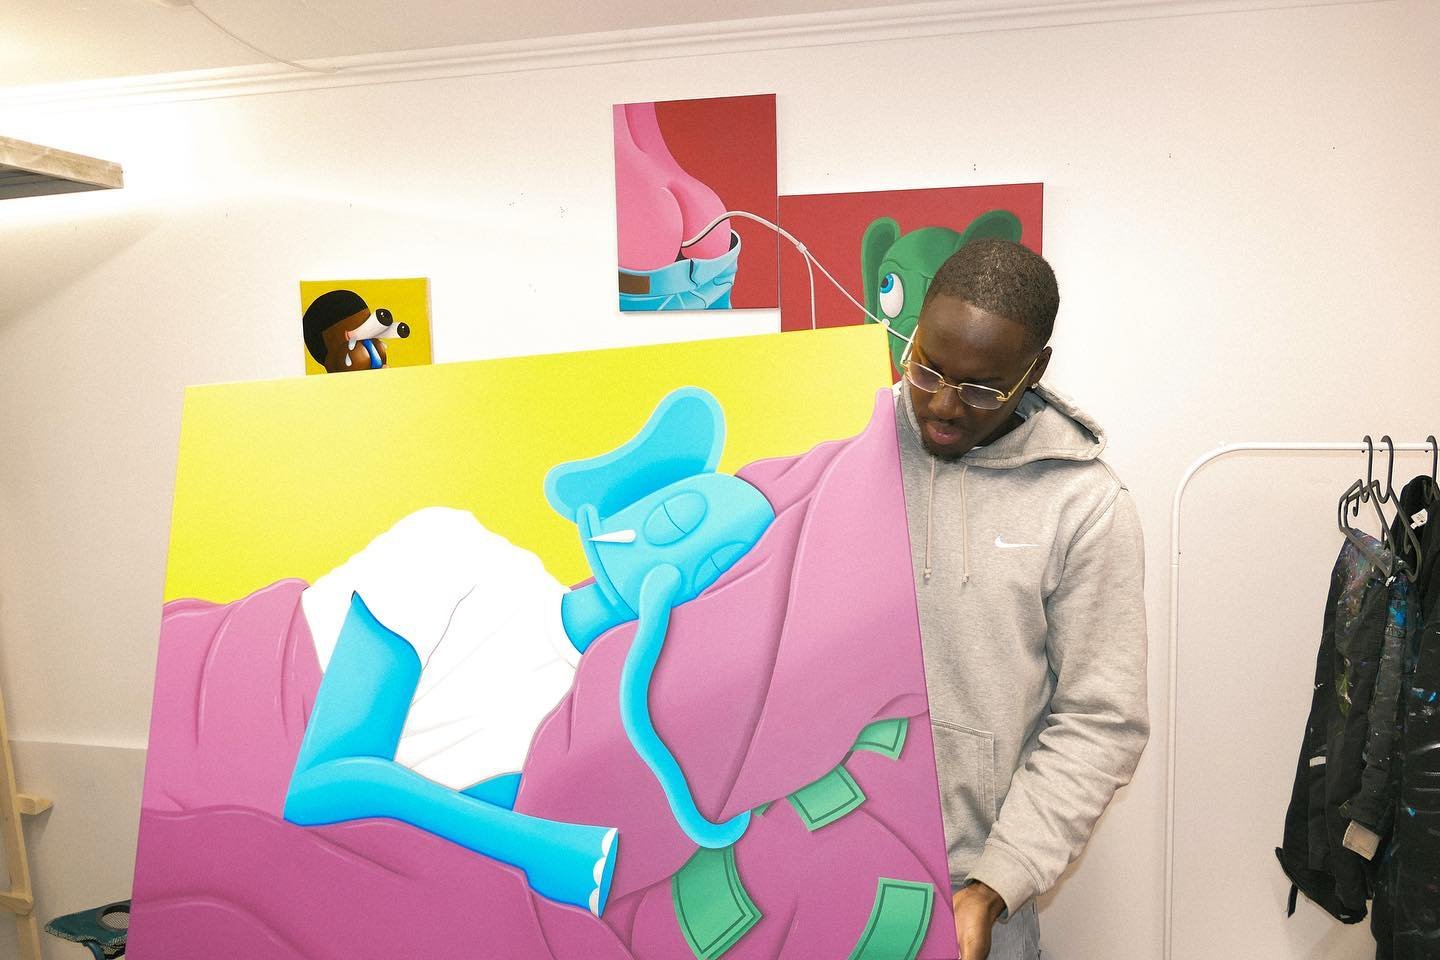 Linked up with Karlexander in Toulouse for the opening presentation of his new piece, &Ccedil;&rsquo;est Comme &ccedil;a que j&rsquo;aime me reposer. It was an eventful weekend, and I learned more about him. 

Extremely creative, you can see how his 